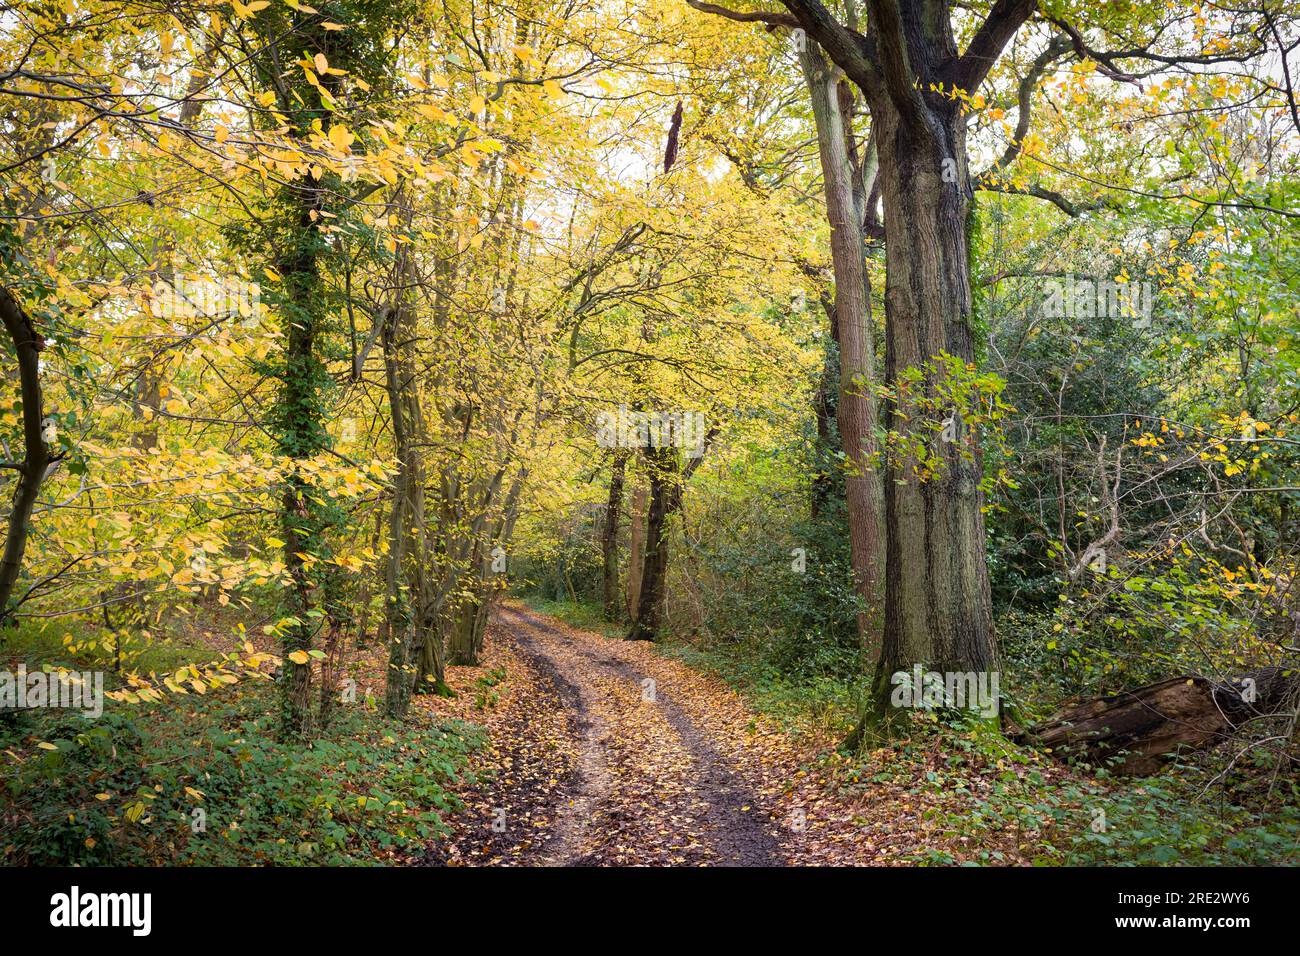 Trees with golden leaves in autumn with path or trail through woodland. London's green belt, UK Stock Photo